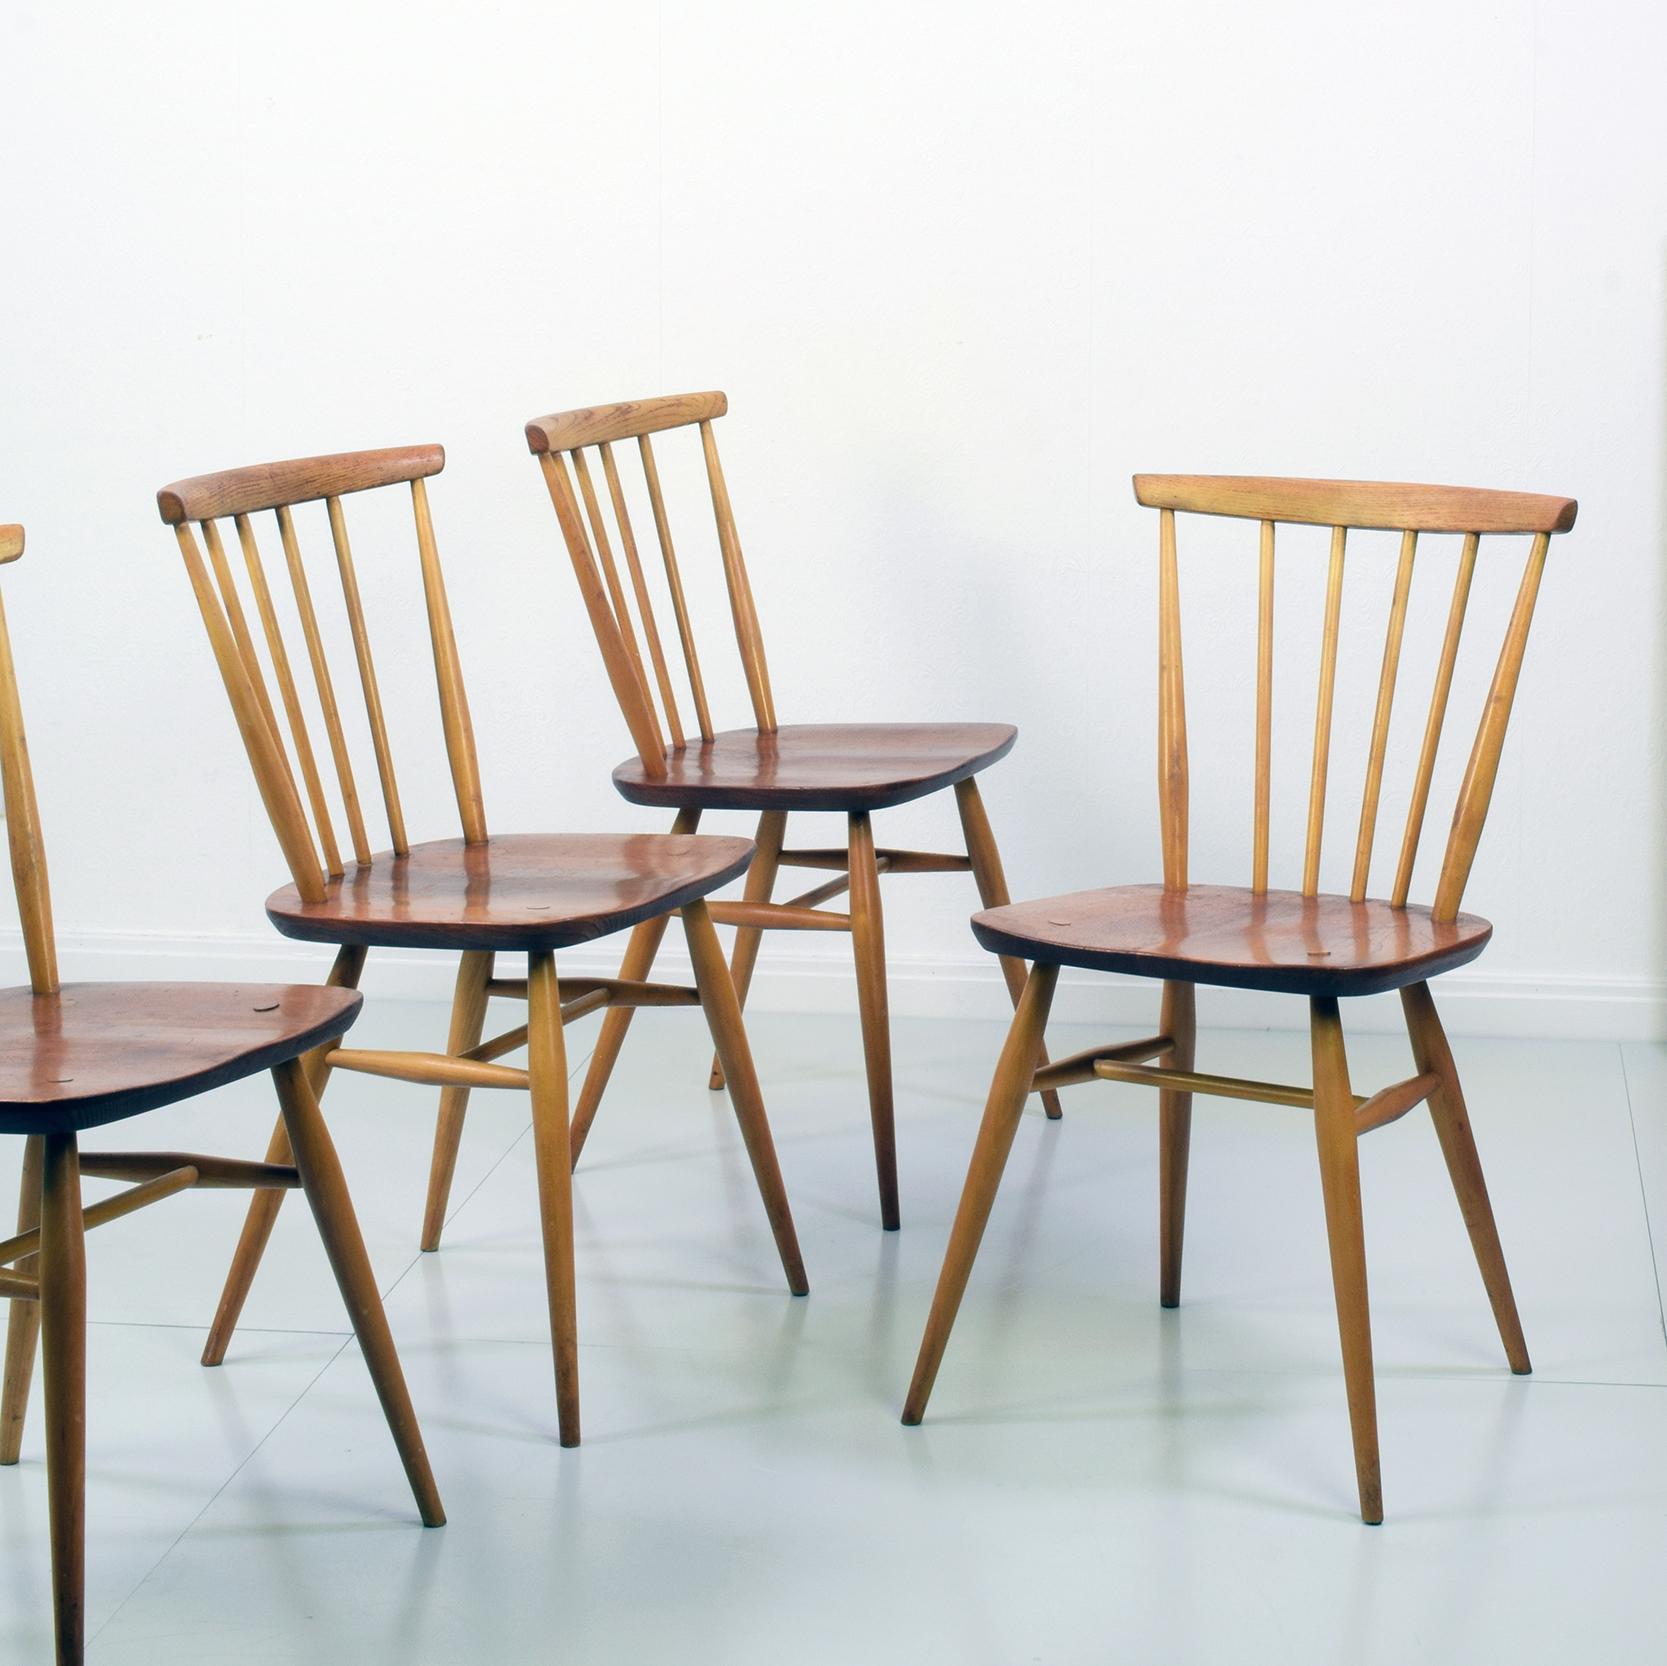 Lucian Ercolani for Ercol Furniture Ltd
Model 737 'Chiltern' 'Swept-Back' chairs, set of four, circa 1970s.
Solid elm and beech.
A good set of these simple, elegant chairs, showing lovely patina and age.
Overall condition is good, and the chairs are